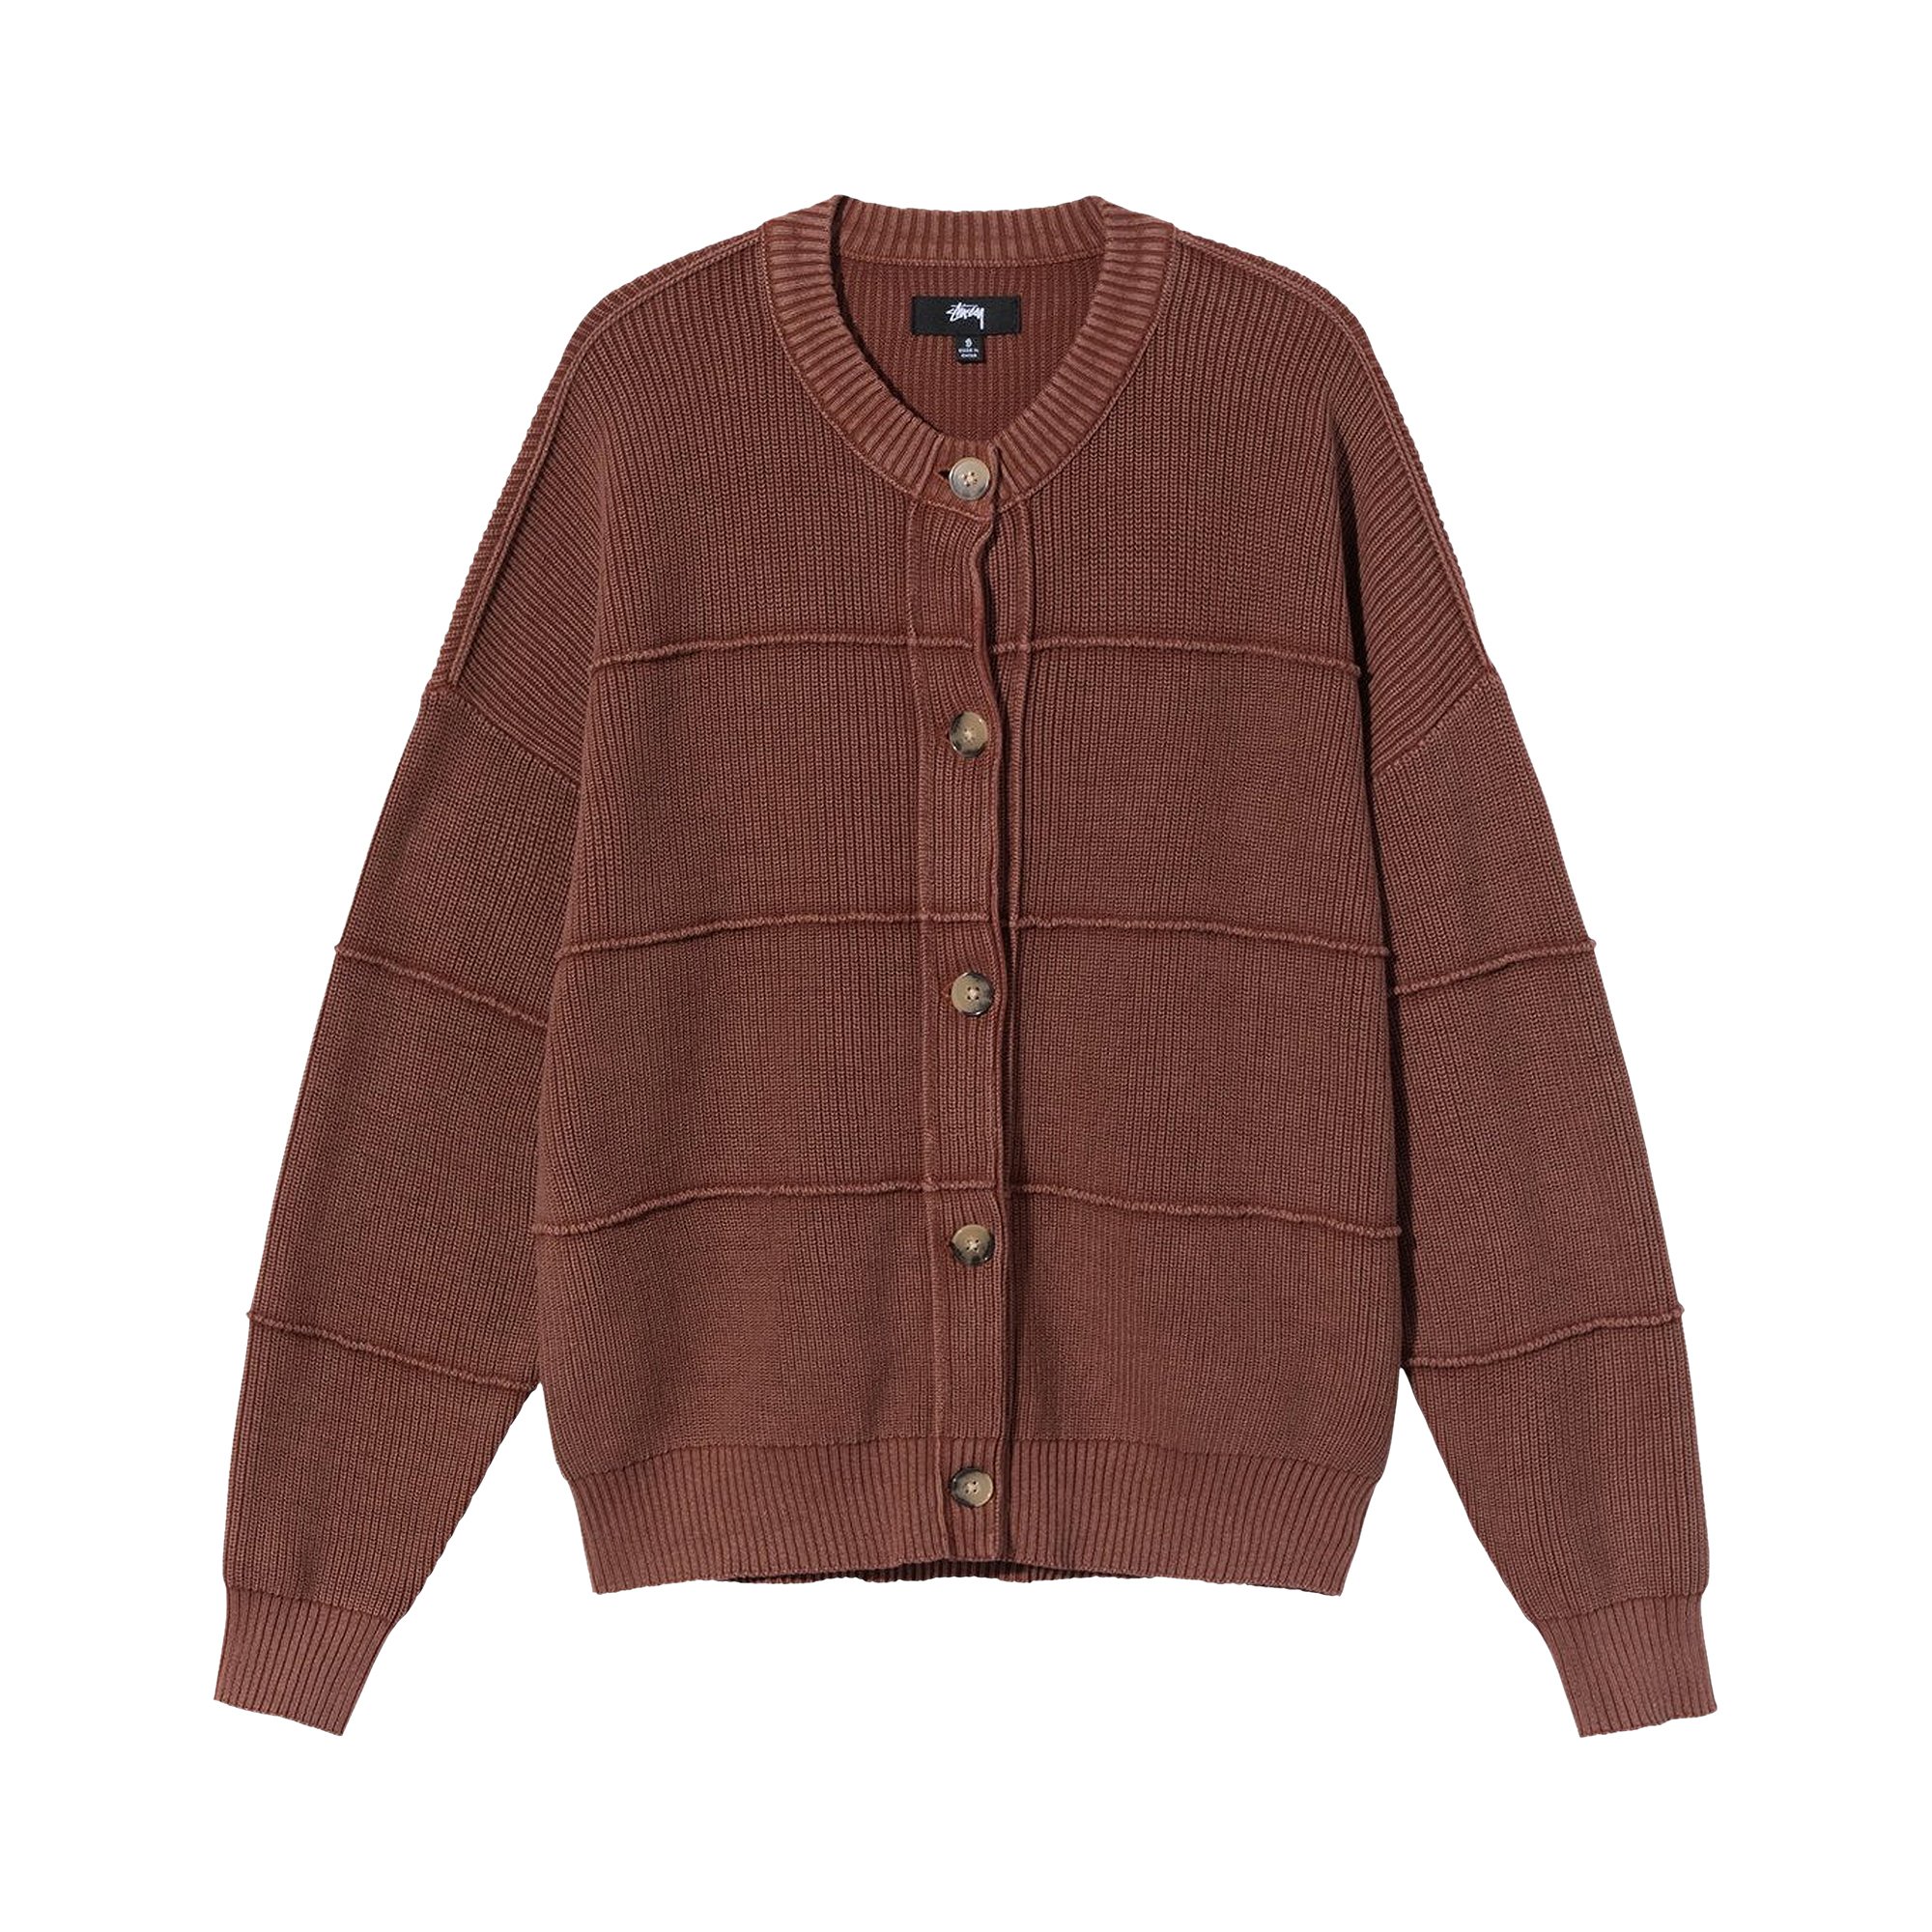 Buy Stussy Lune Inside Out Cardigan 'Copper' - 217053 COPP | GOAT